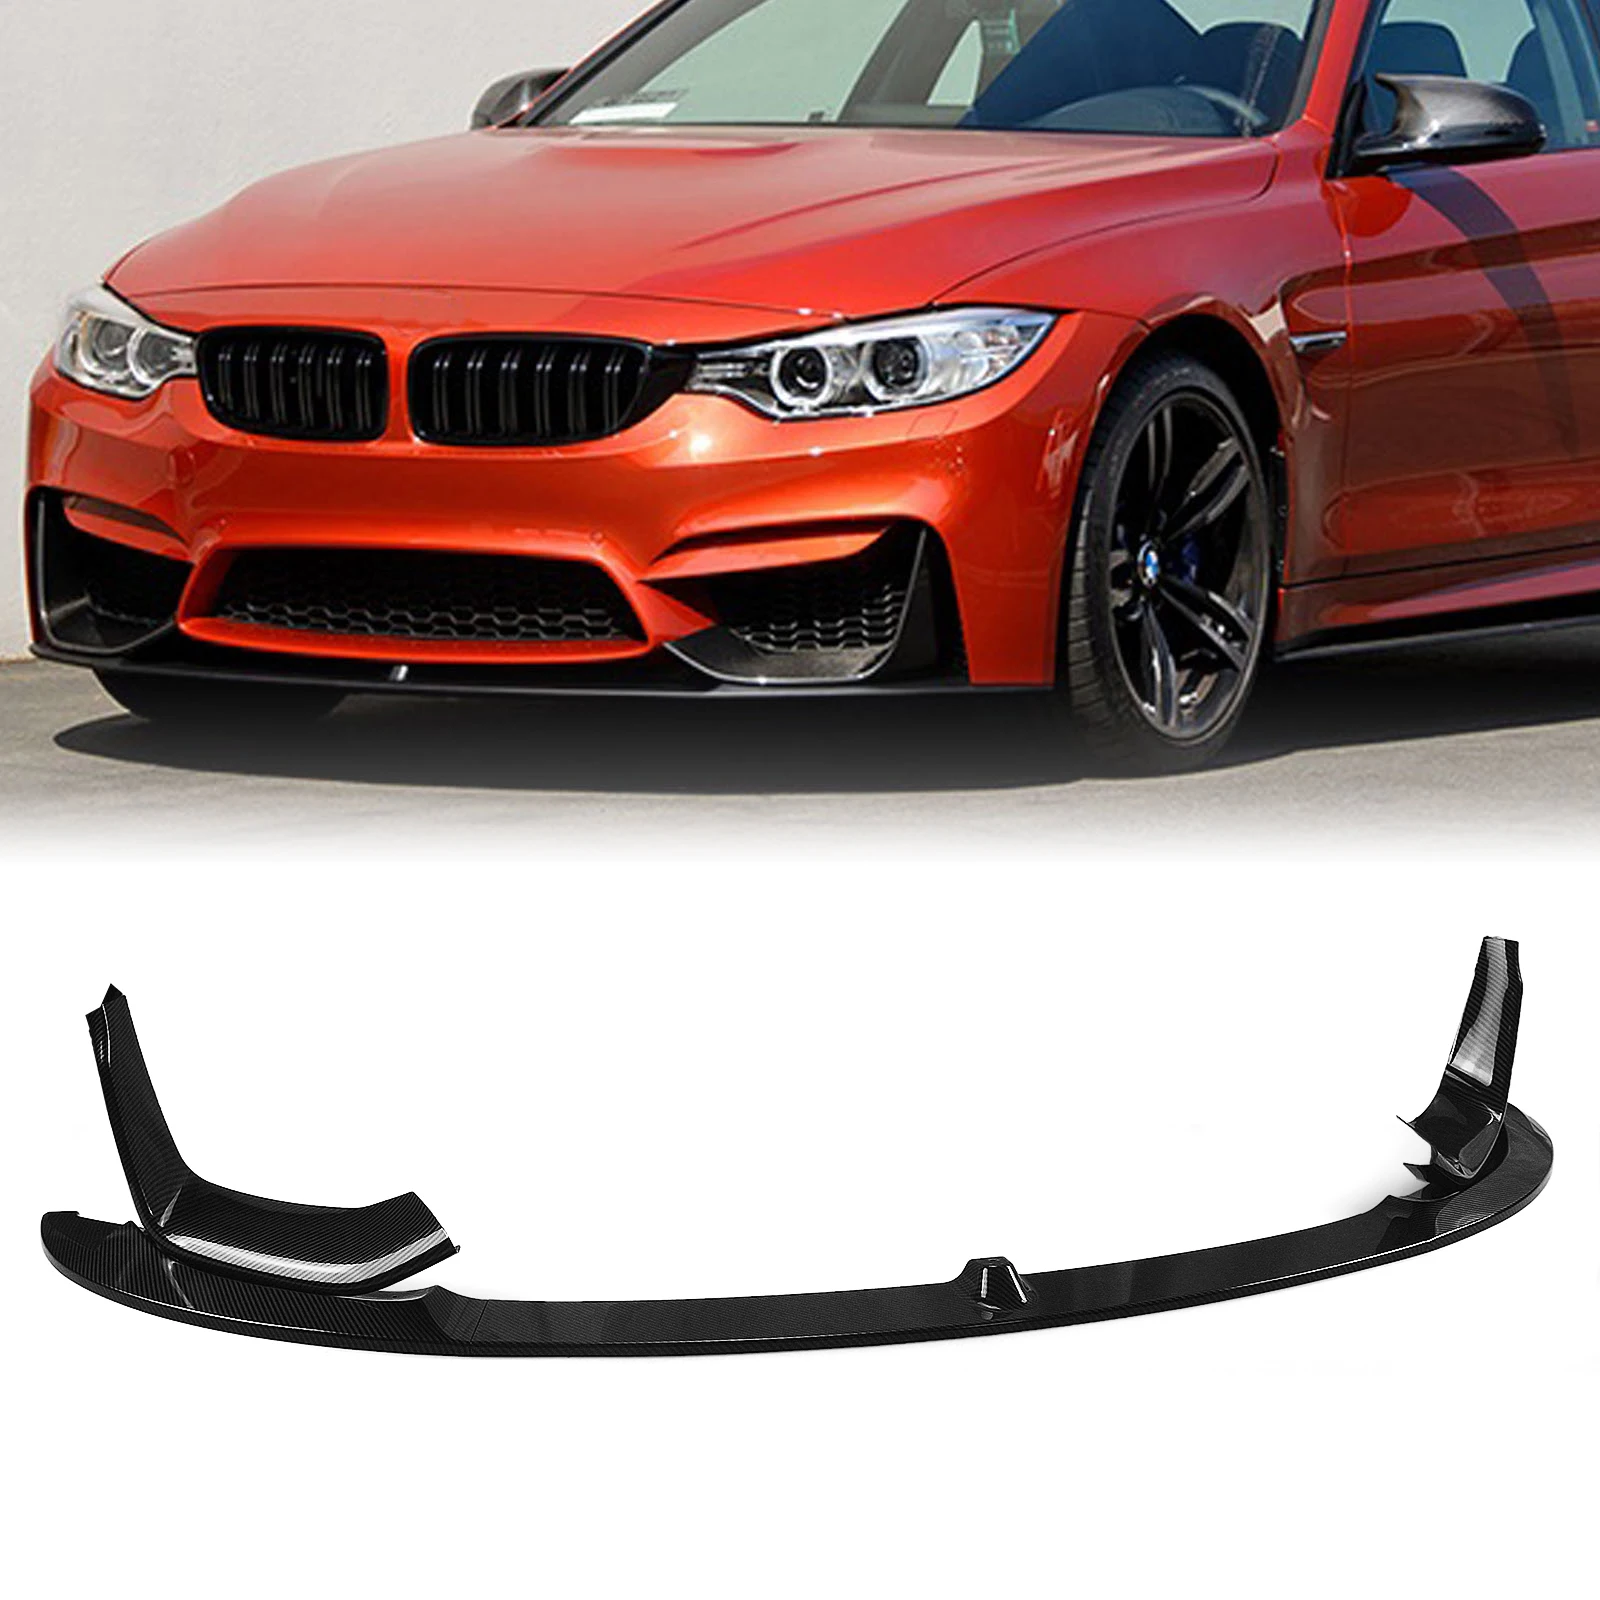 

Front Bumper Spoiler Lip For BMW F80 M3 F83 F82 M4 2015-2020 Only Carbon Fiber Look Lower Side Air Vent Intake Splitter Cover